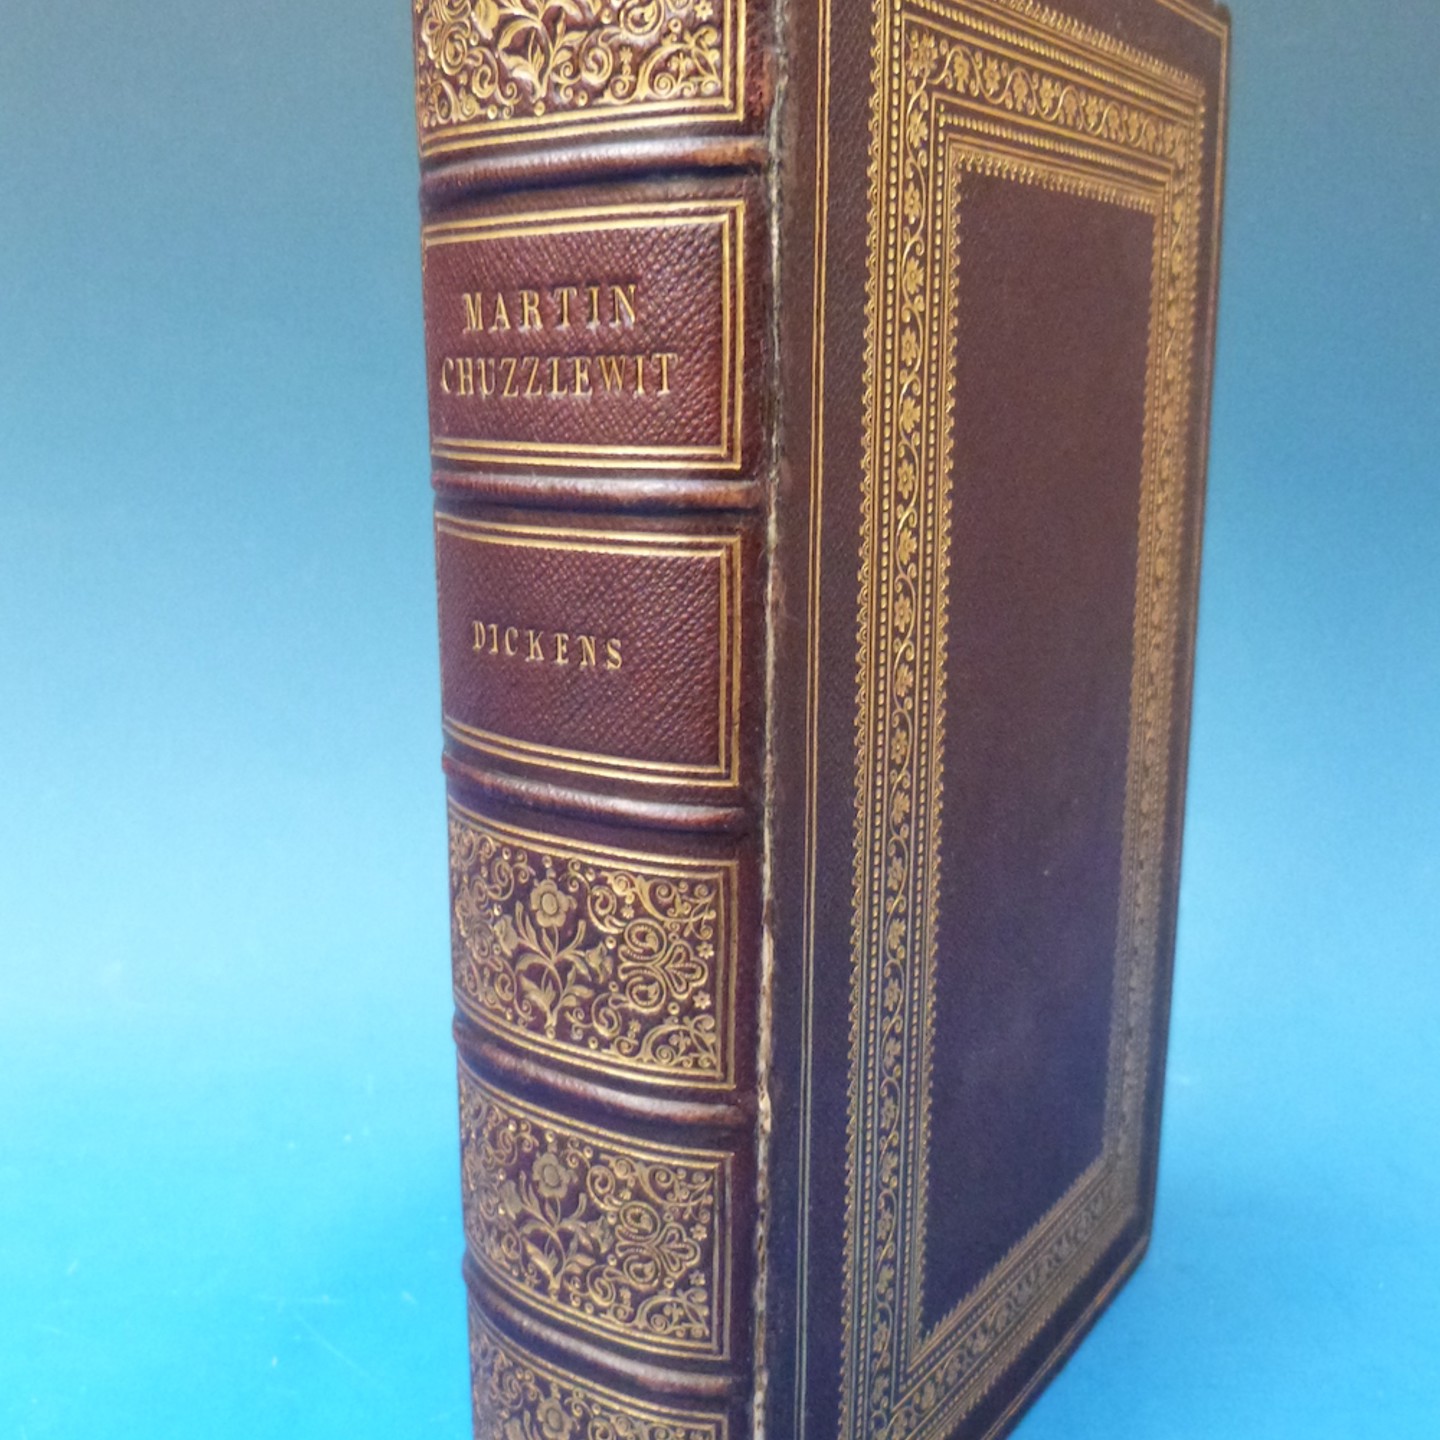 Charles Dickens, Martin Chuzzlewit (Association Copy) Chapman & Hall, London 1844. Sold For £6,200